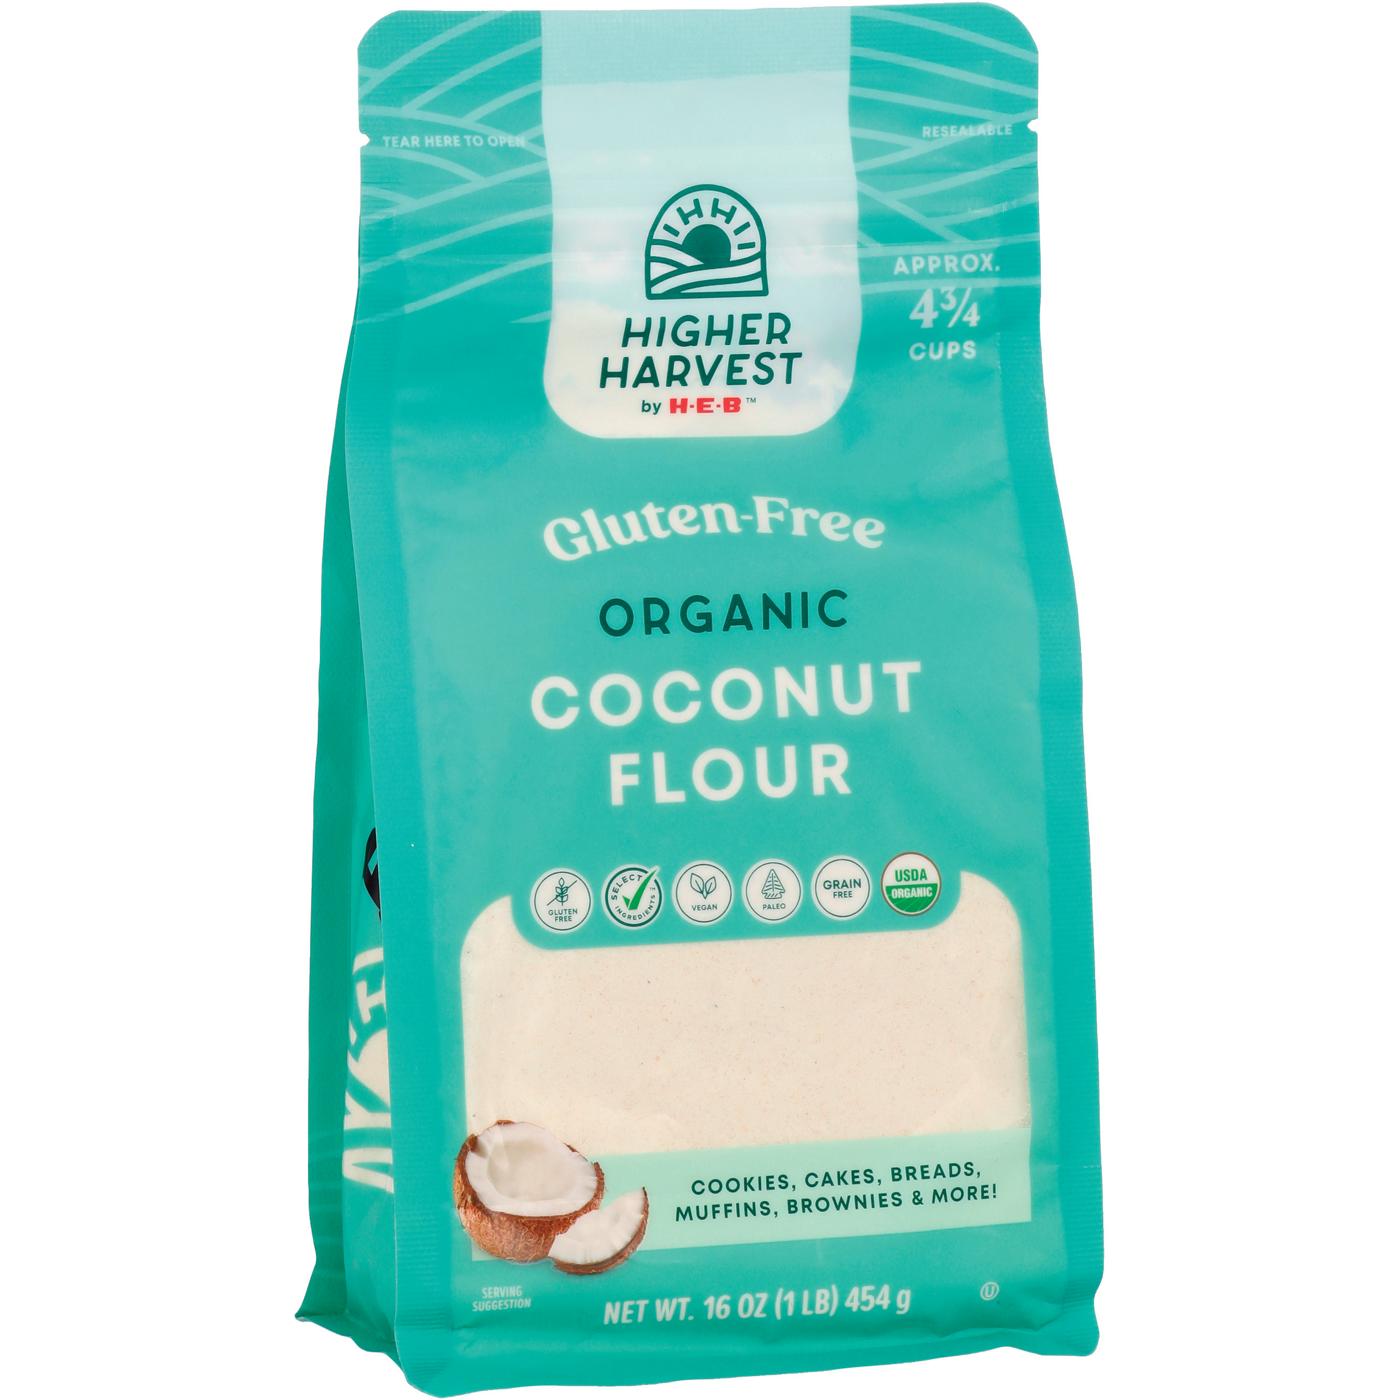 Higher Harvest by H-E-B Gluten-Free Organic Coconut Flour; image 2 of 3